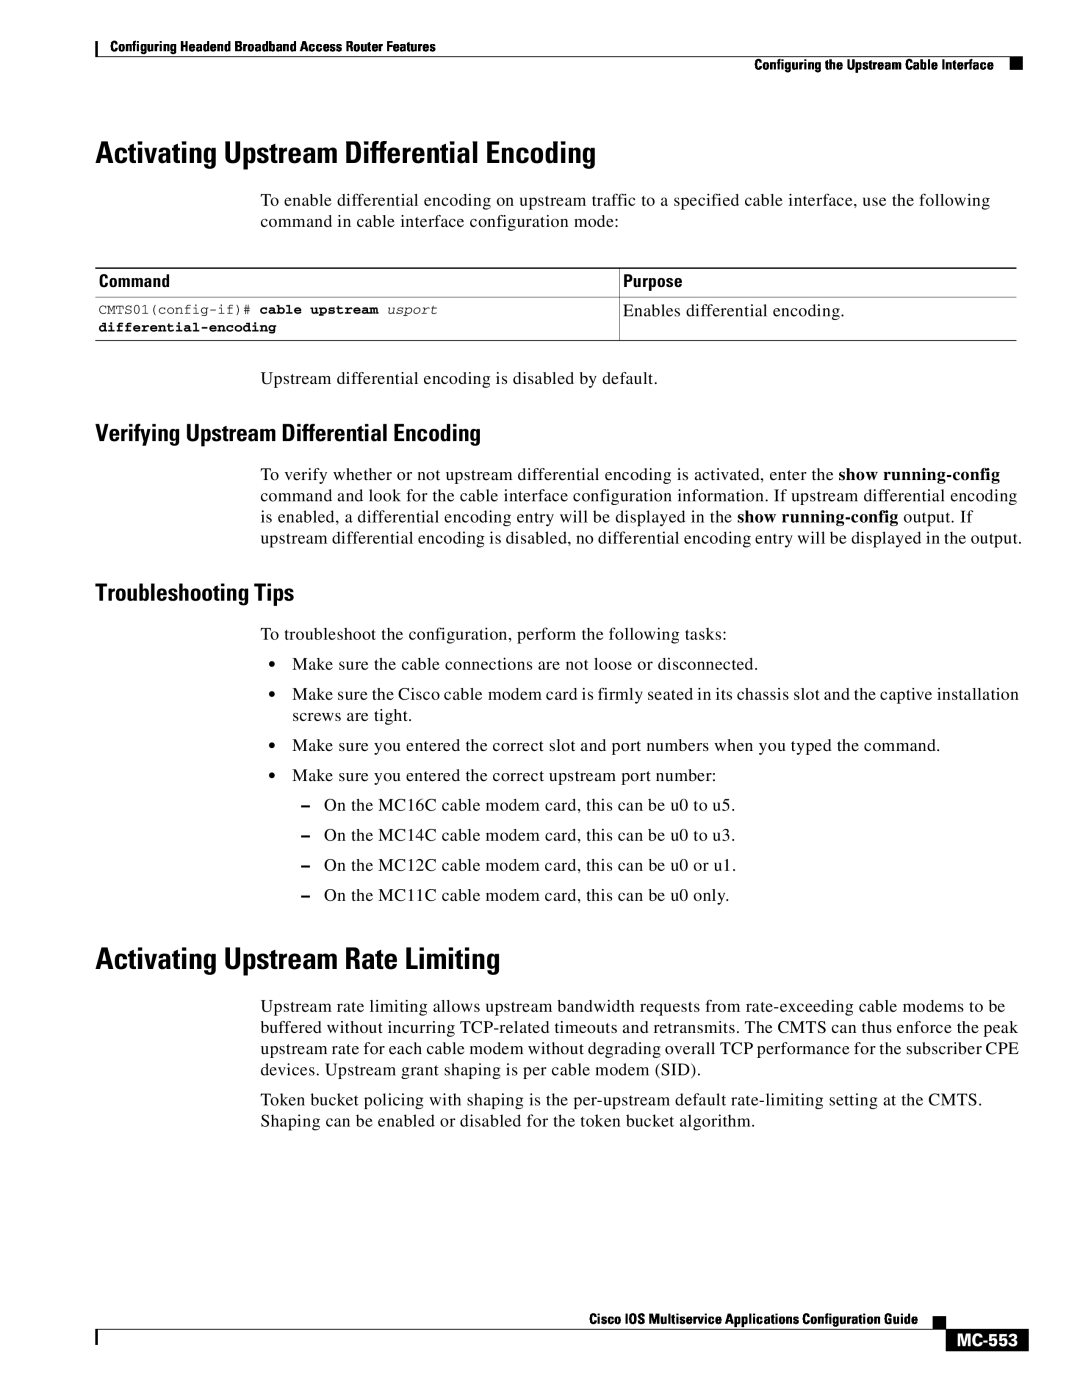 Cisco Systems uBR7200 manual Activating Upstream Differential Encoding, Activating Upstream Rate Limiting, MC-553, Command 